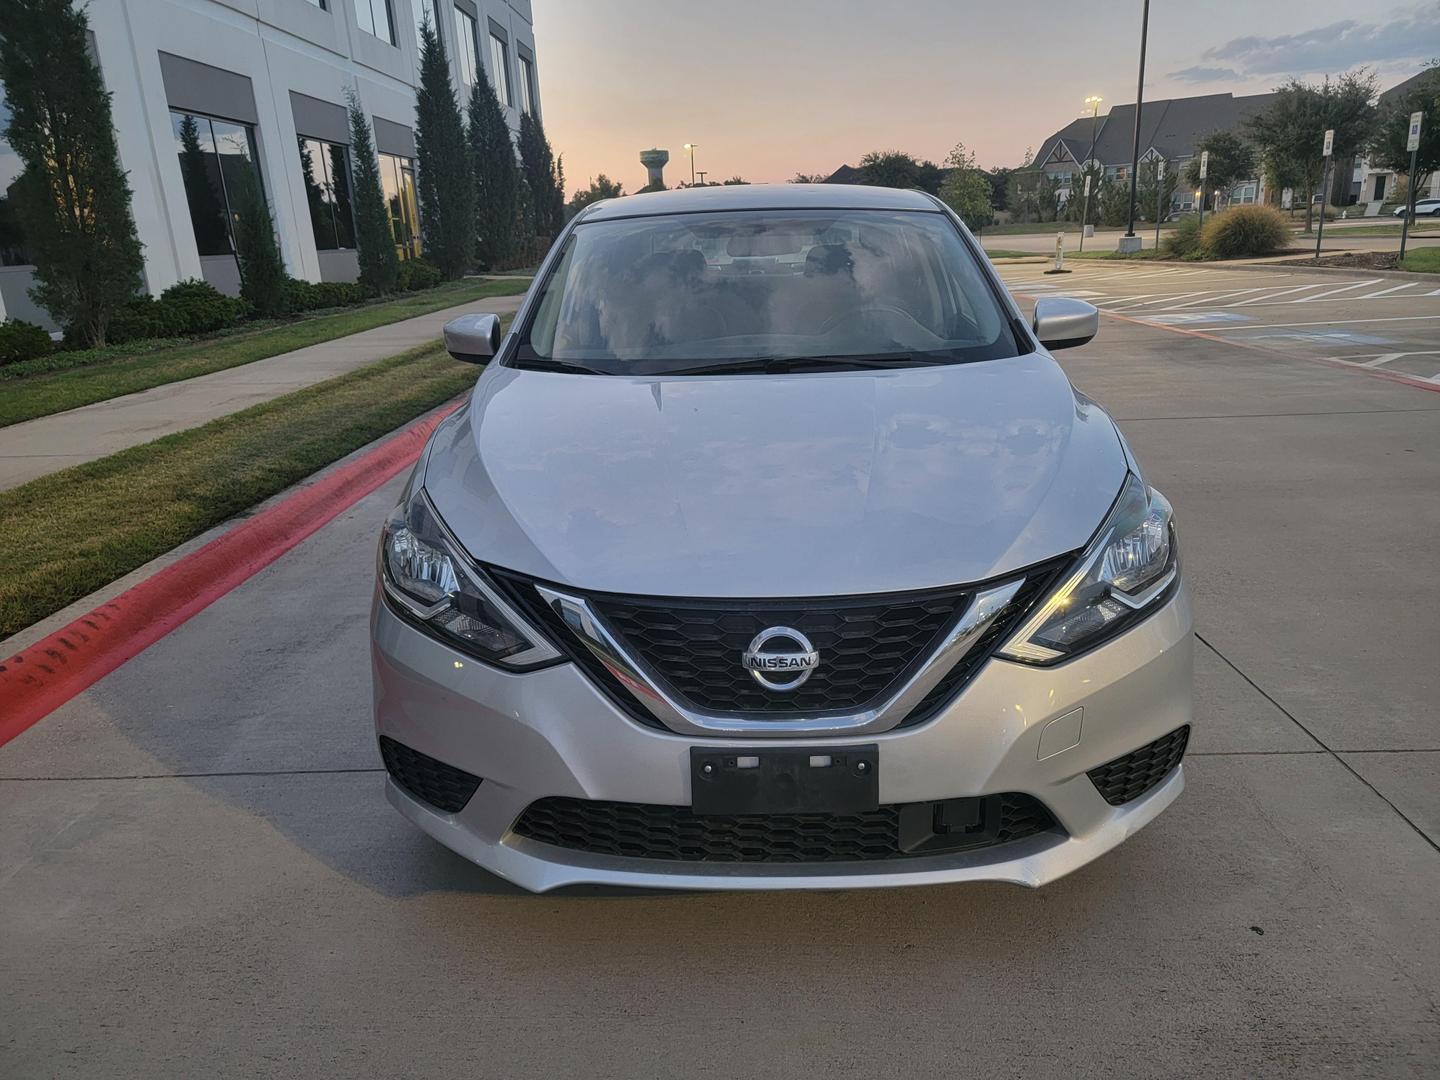 Used 2019 Nissan Sentra S with VIN 3N1AB7AP5KY260294 for sale in Dallas, TX